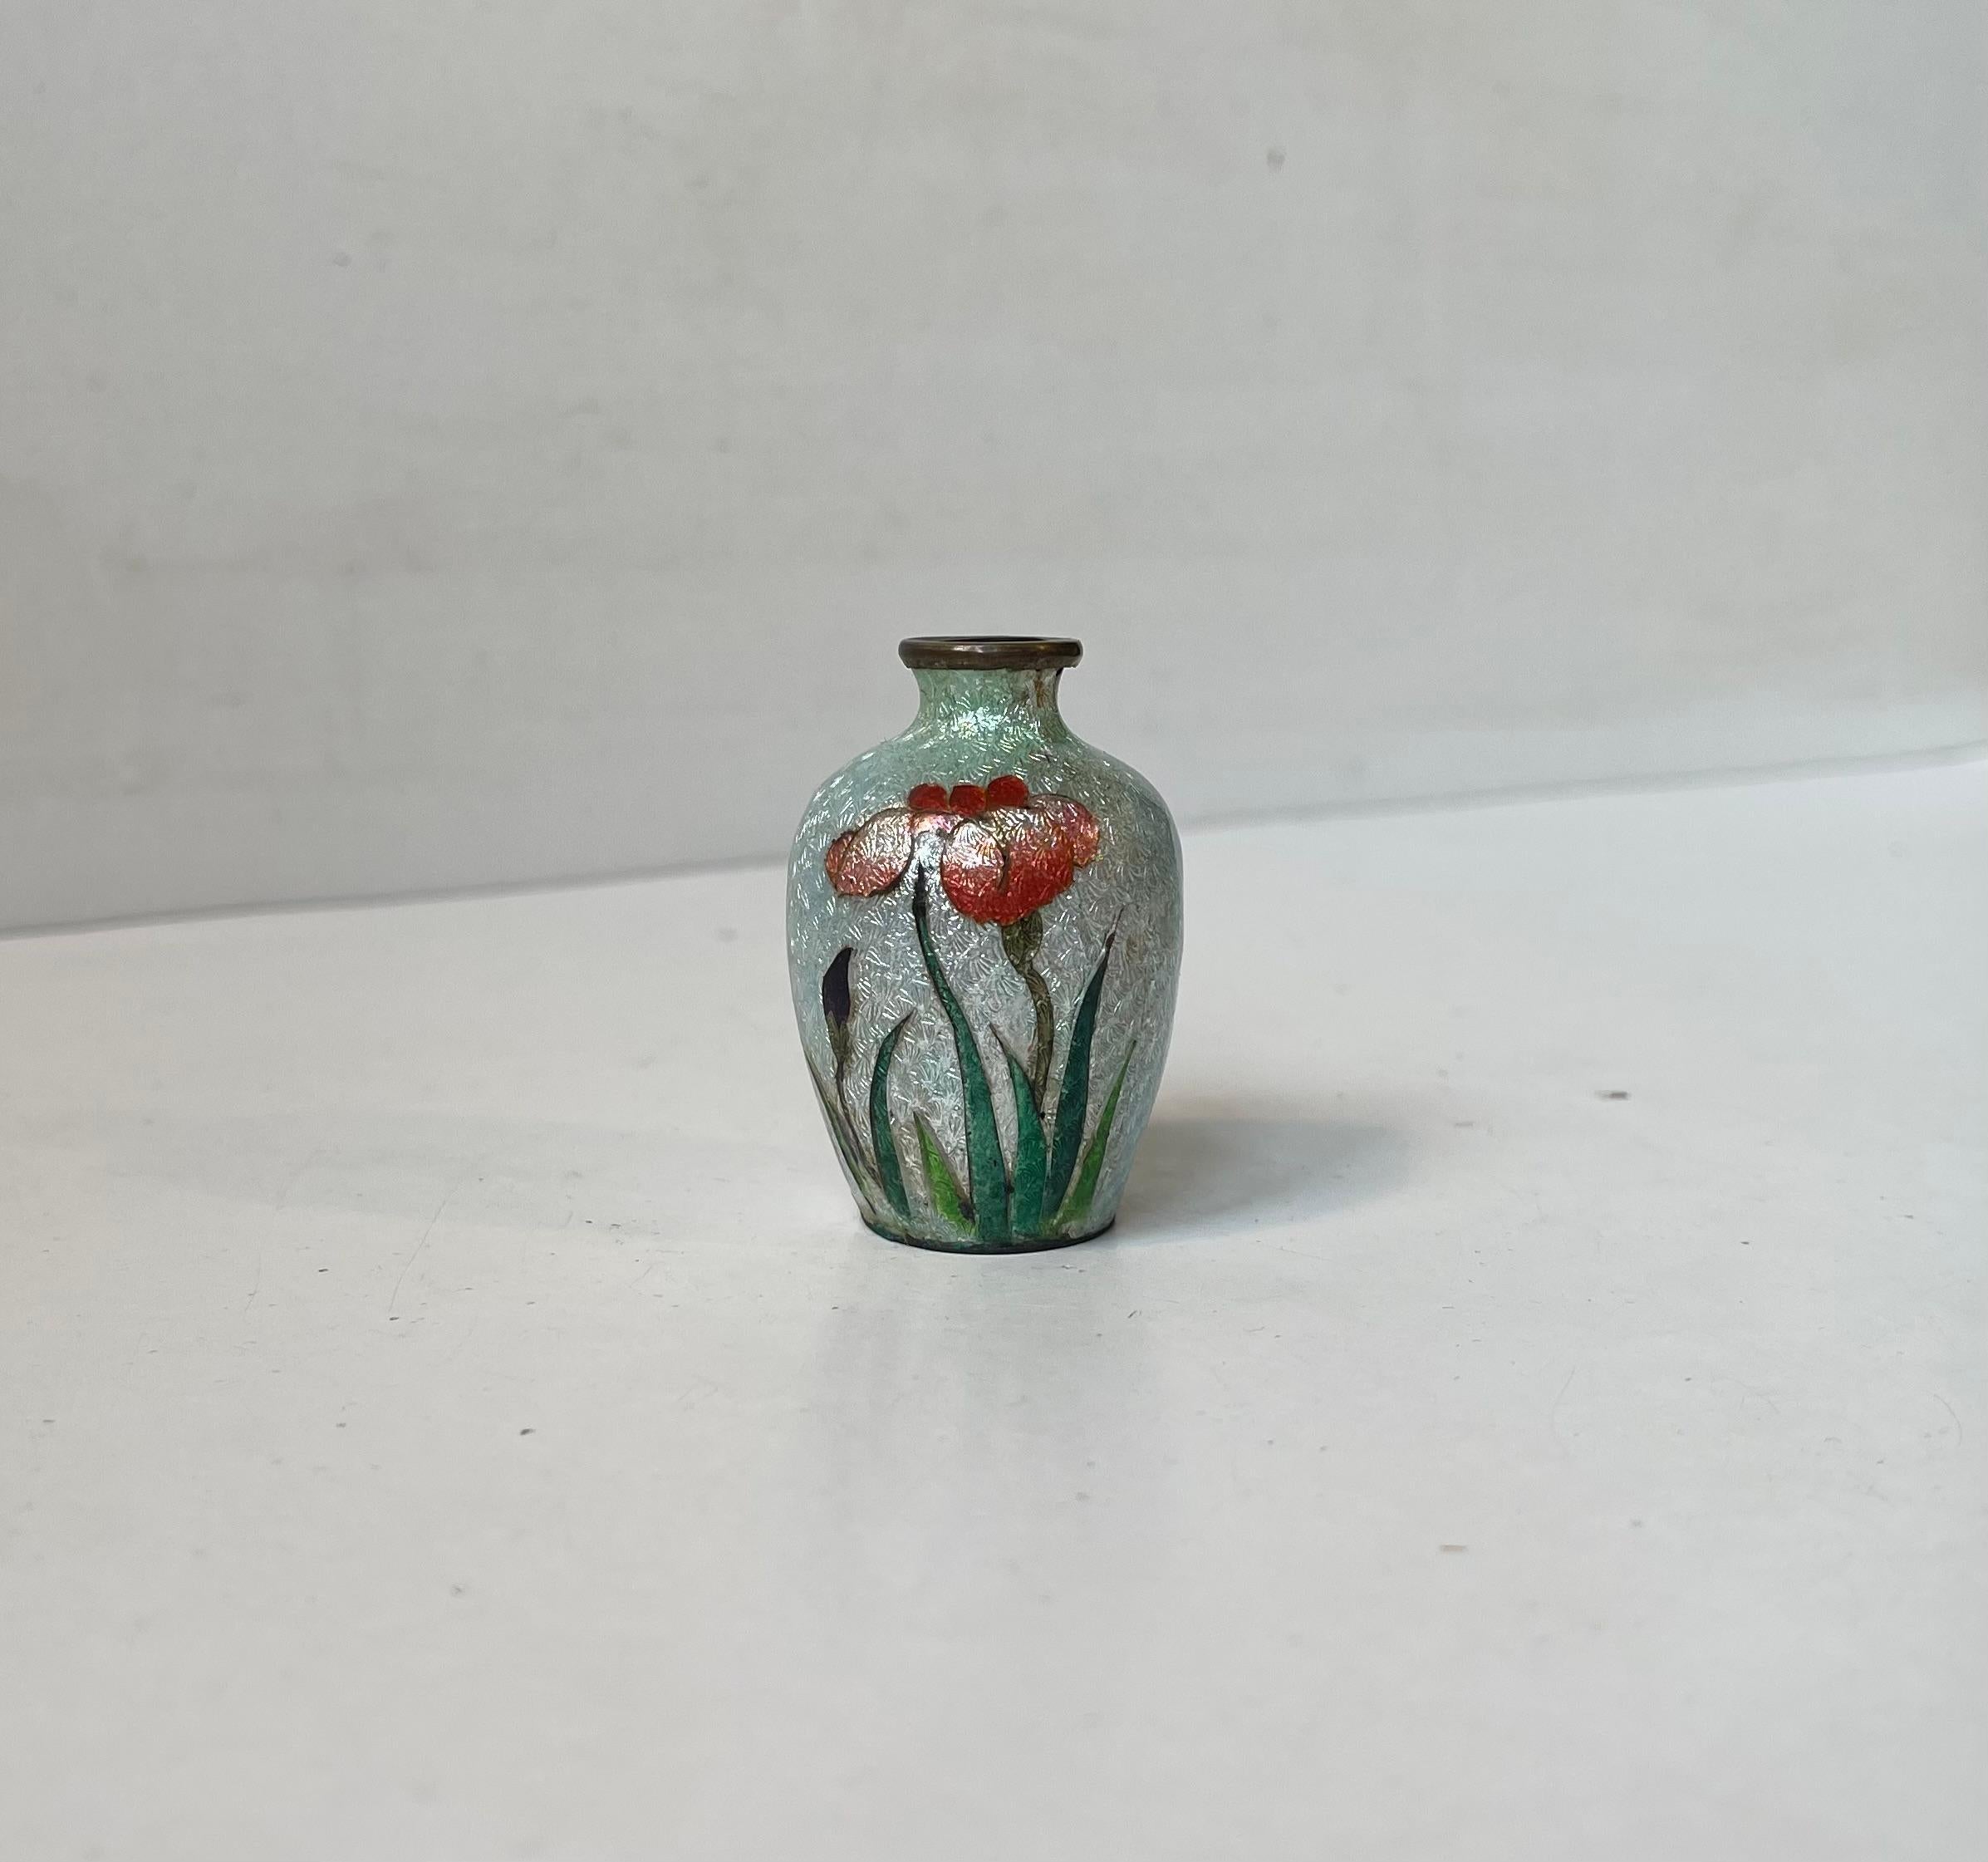 A stunning example of a Japanese foiled cloisonne miniature brass perfume bottle or incense vase hand-painted with decorative flowers. The shimmer from this piece is derived from a technique called as ginbari. A technique whereby textured foil